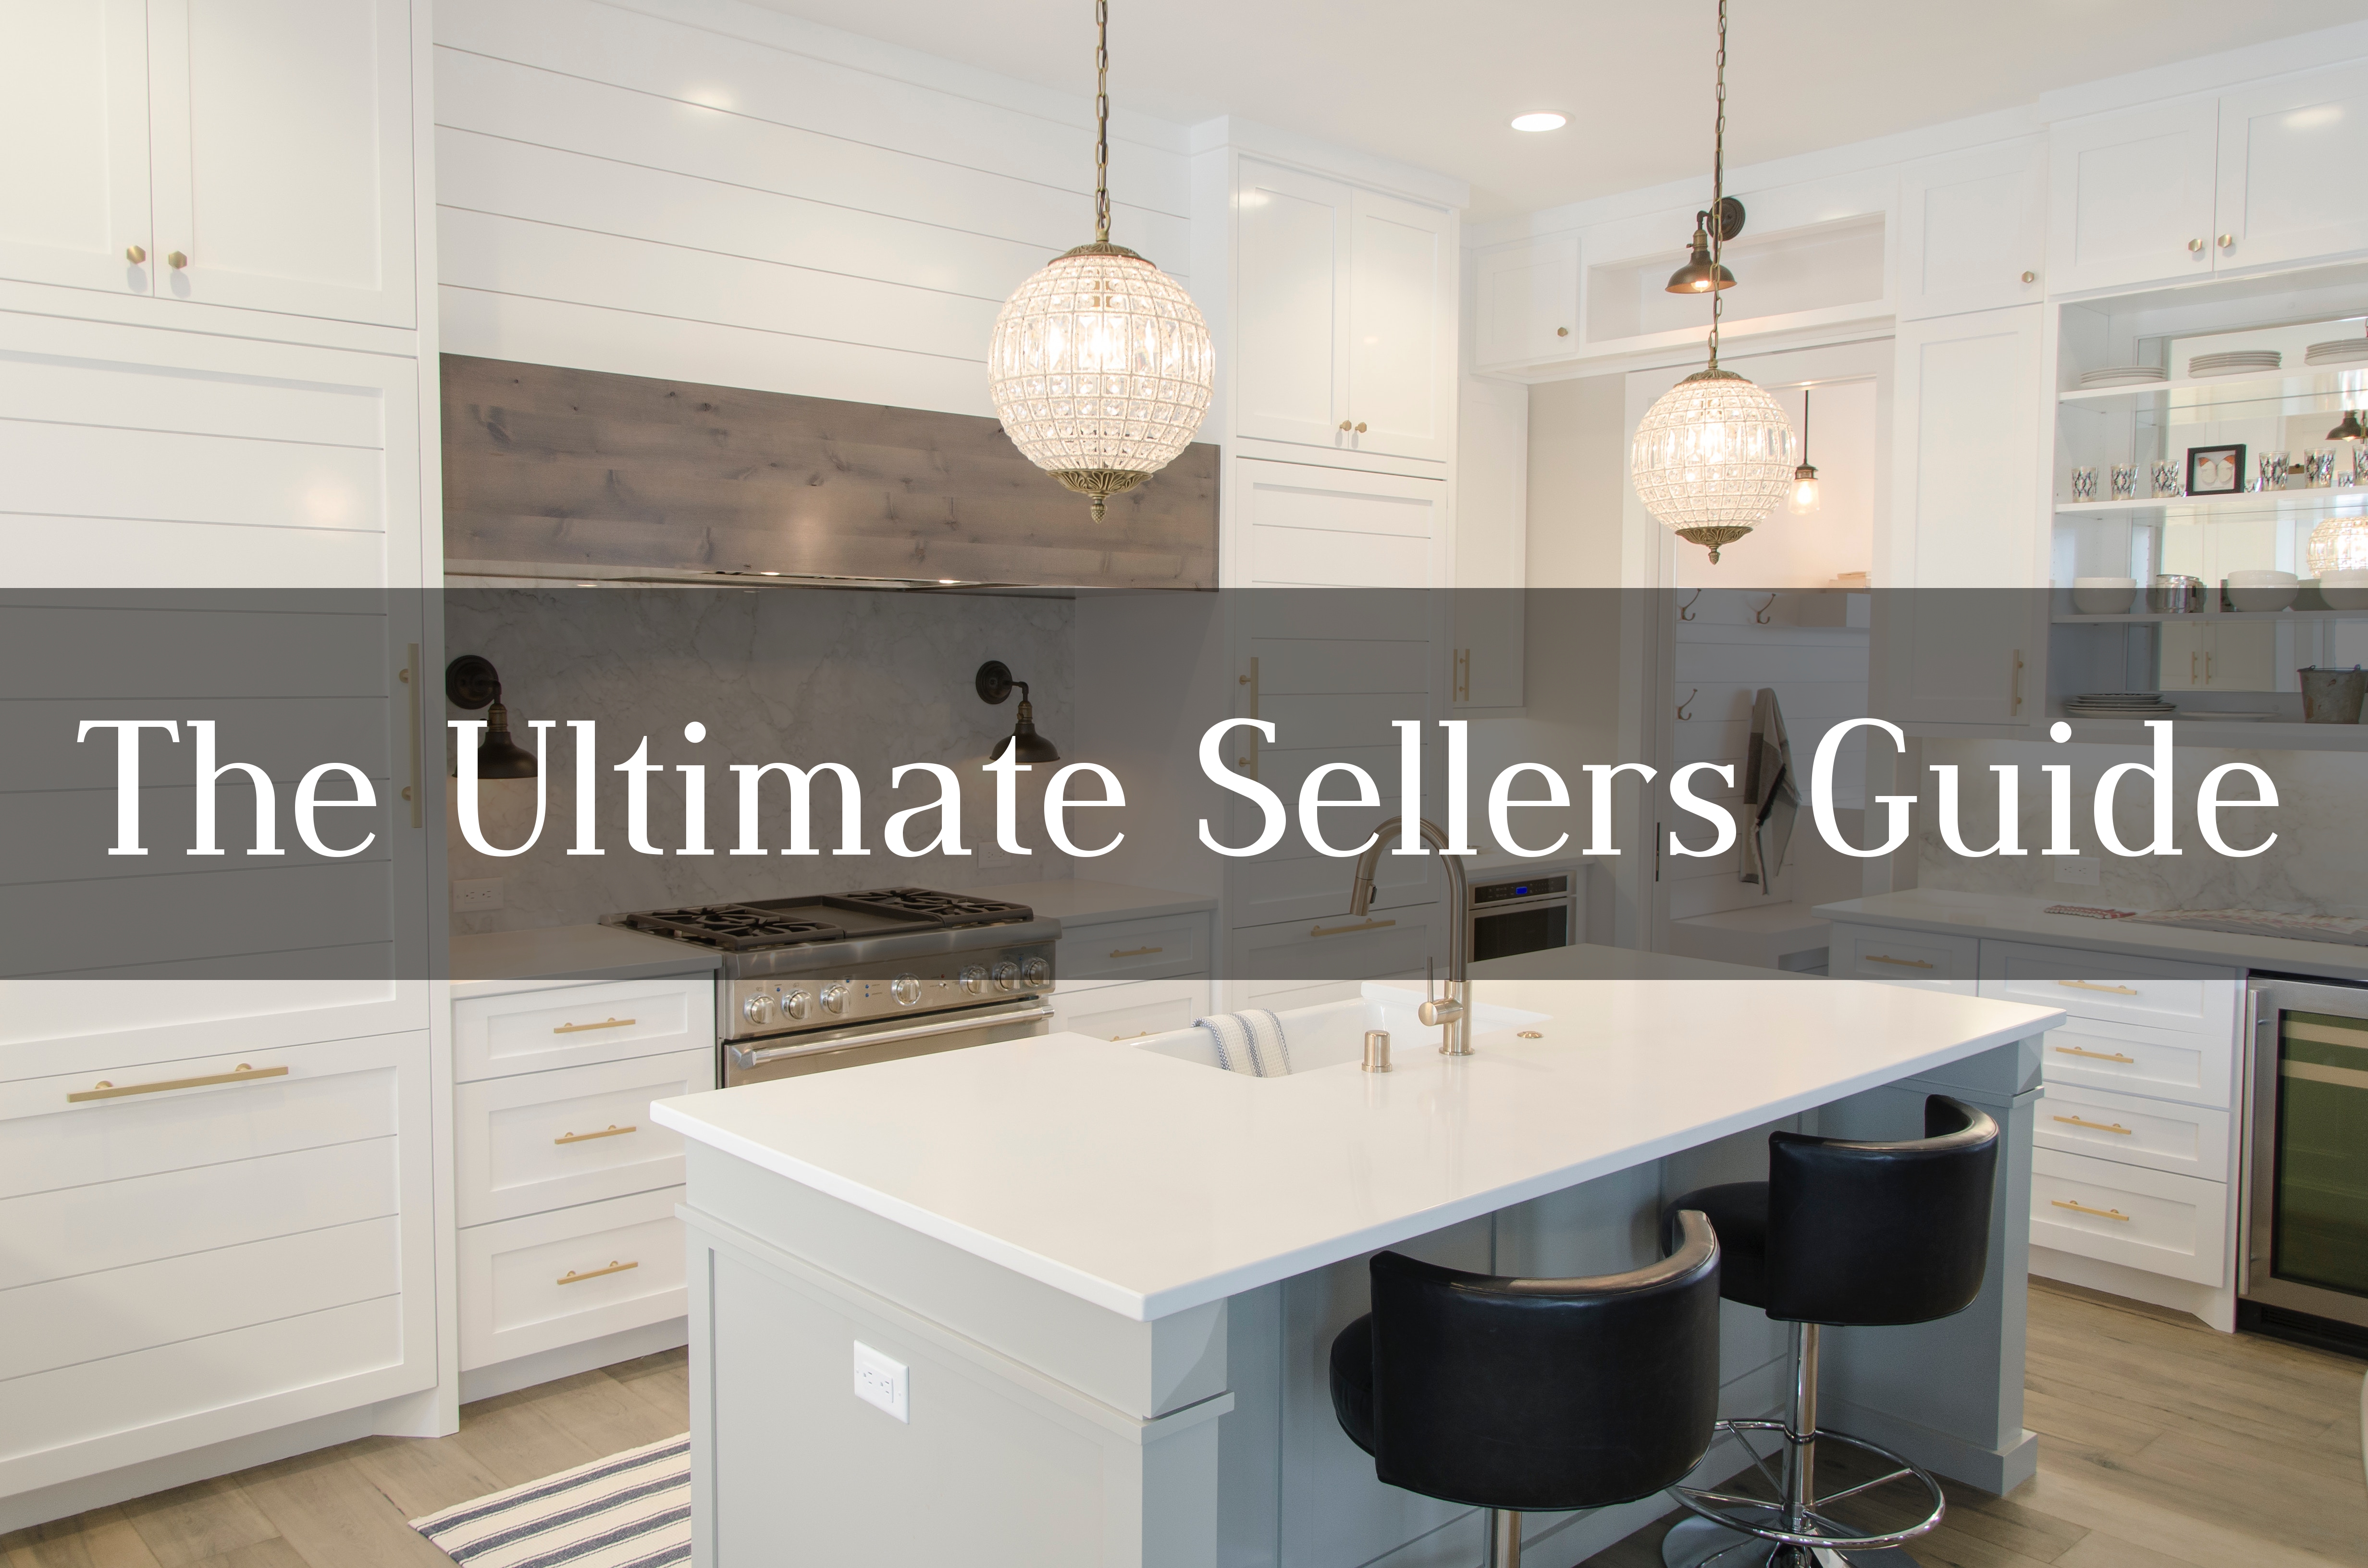 Sold! The Ultimate Guide to Successfully Selling Your Home